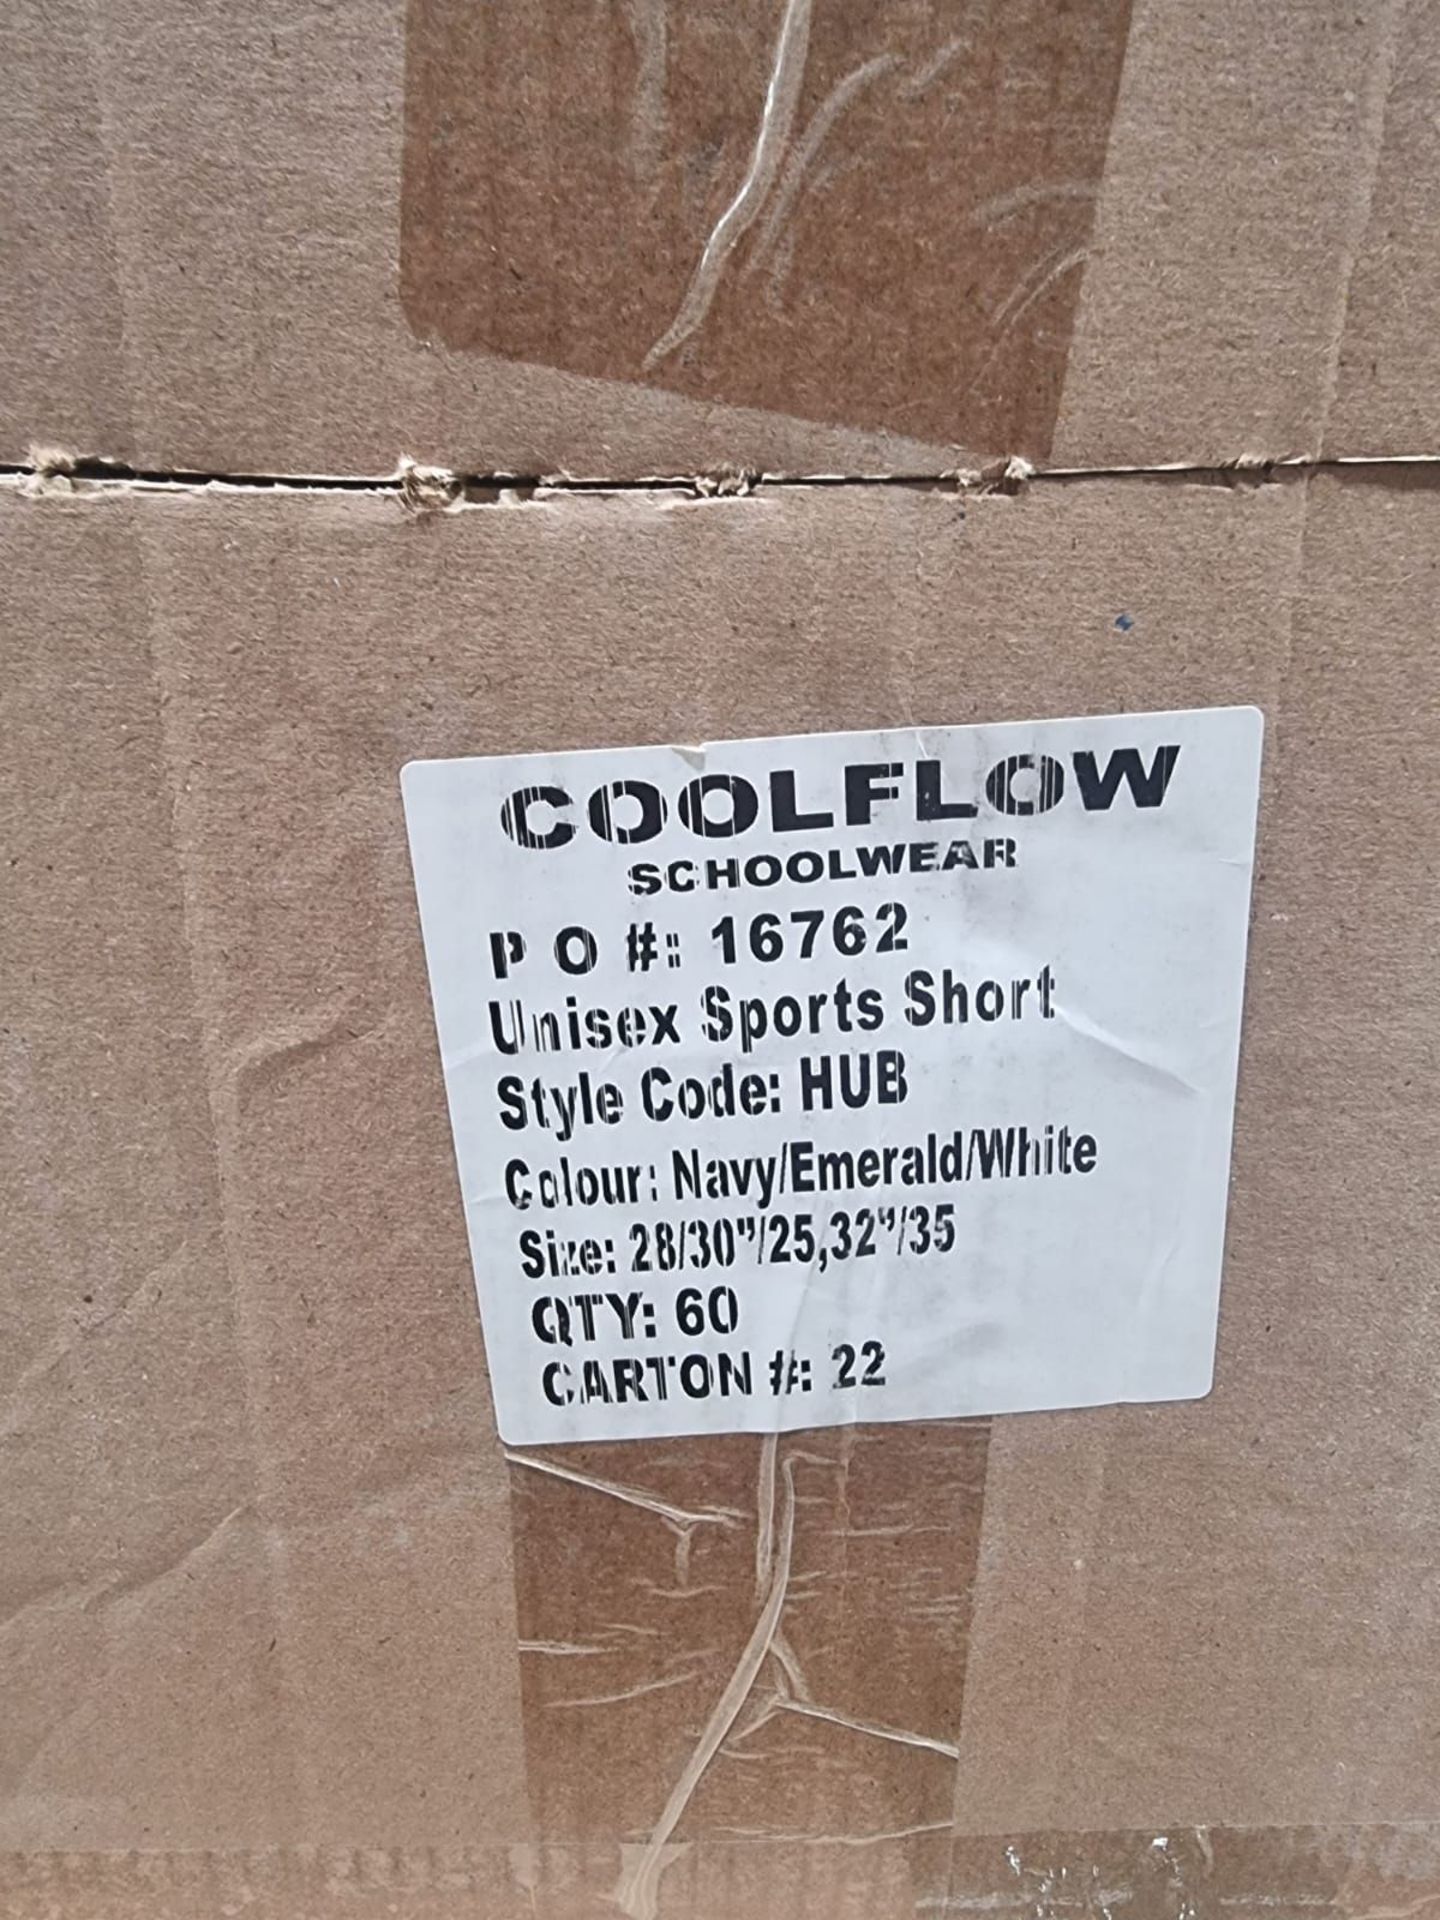 PALLET TO CONTAIN A LARGE QUANTITY OF NEW CLOTHING GOODS. MAY INCLUDE ITEMS SUCH AS: T-SHIRTS, - Image 11 of 28